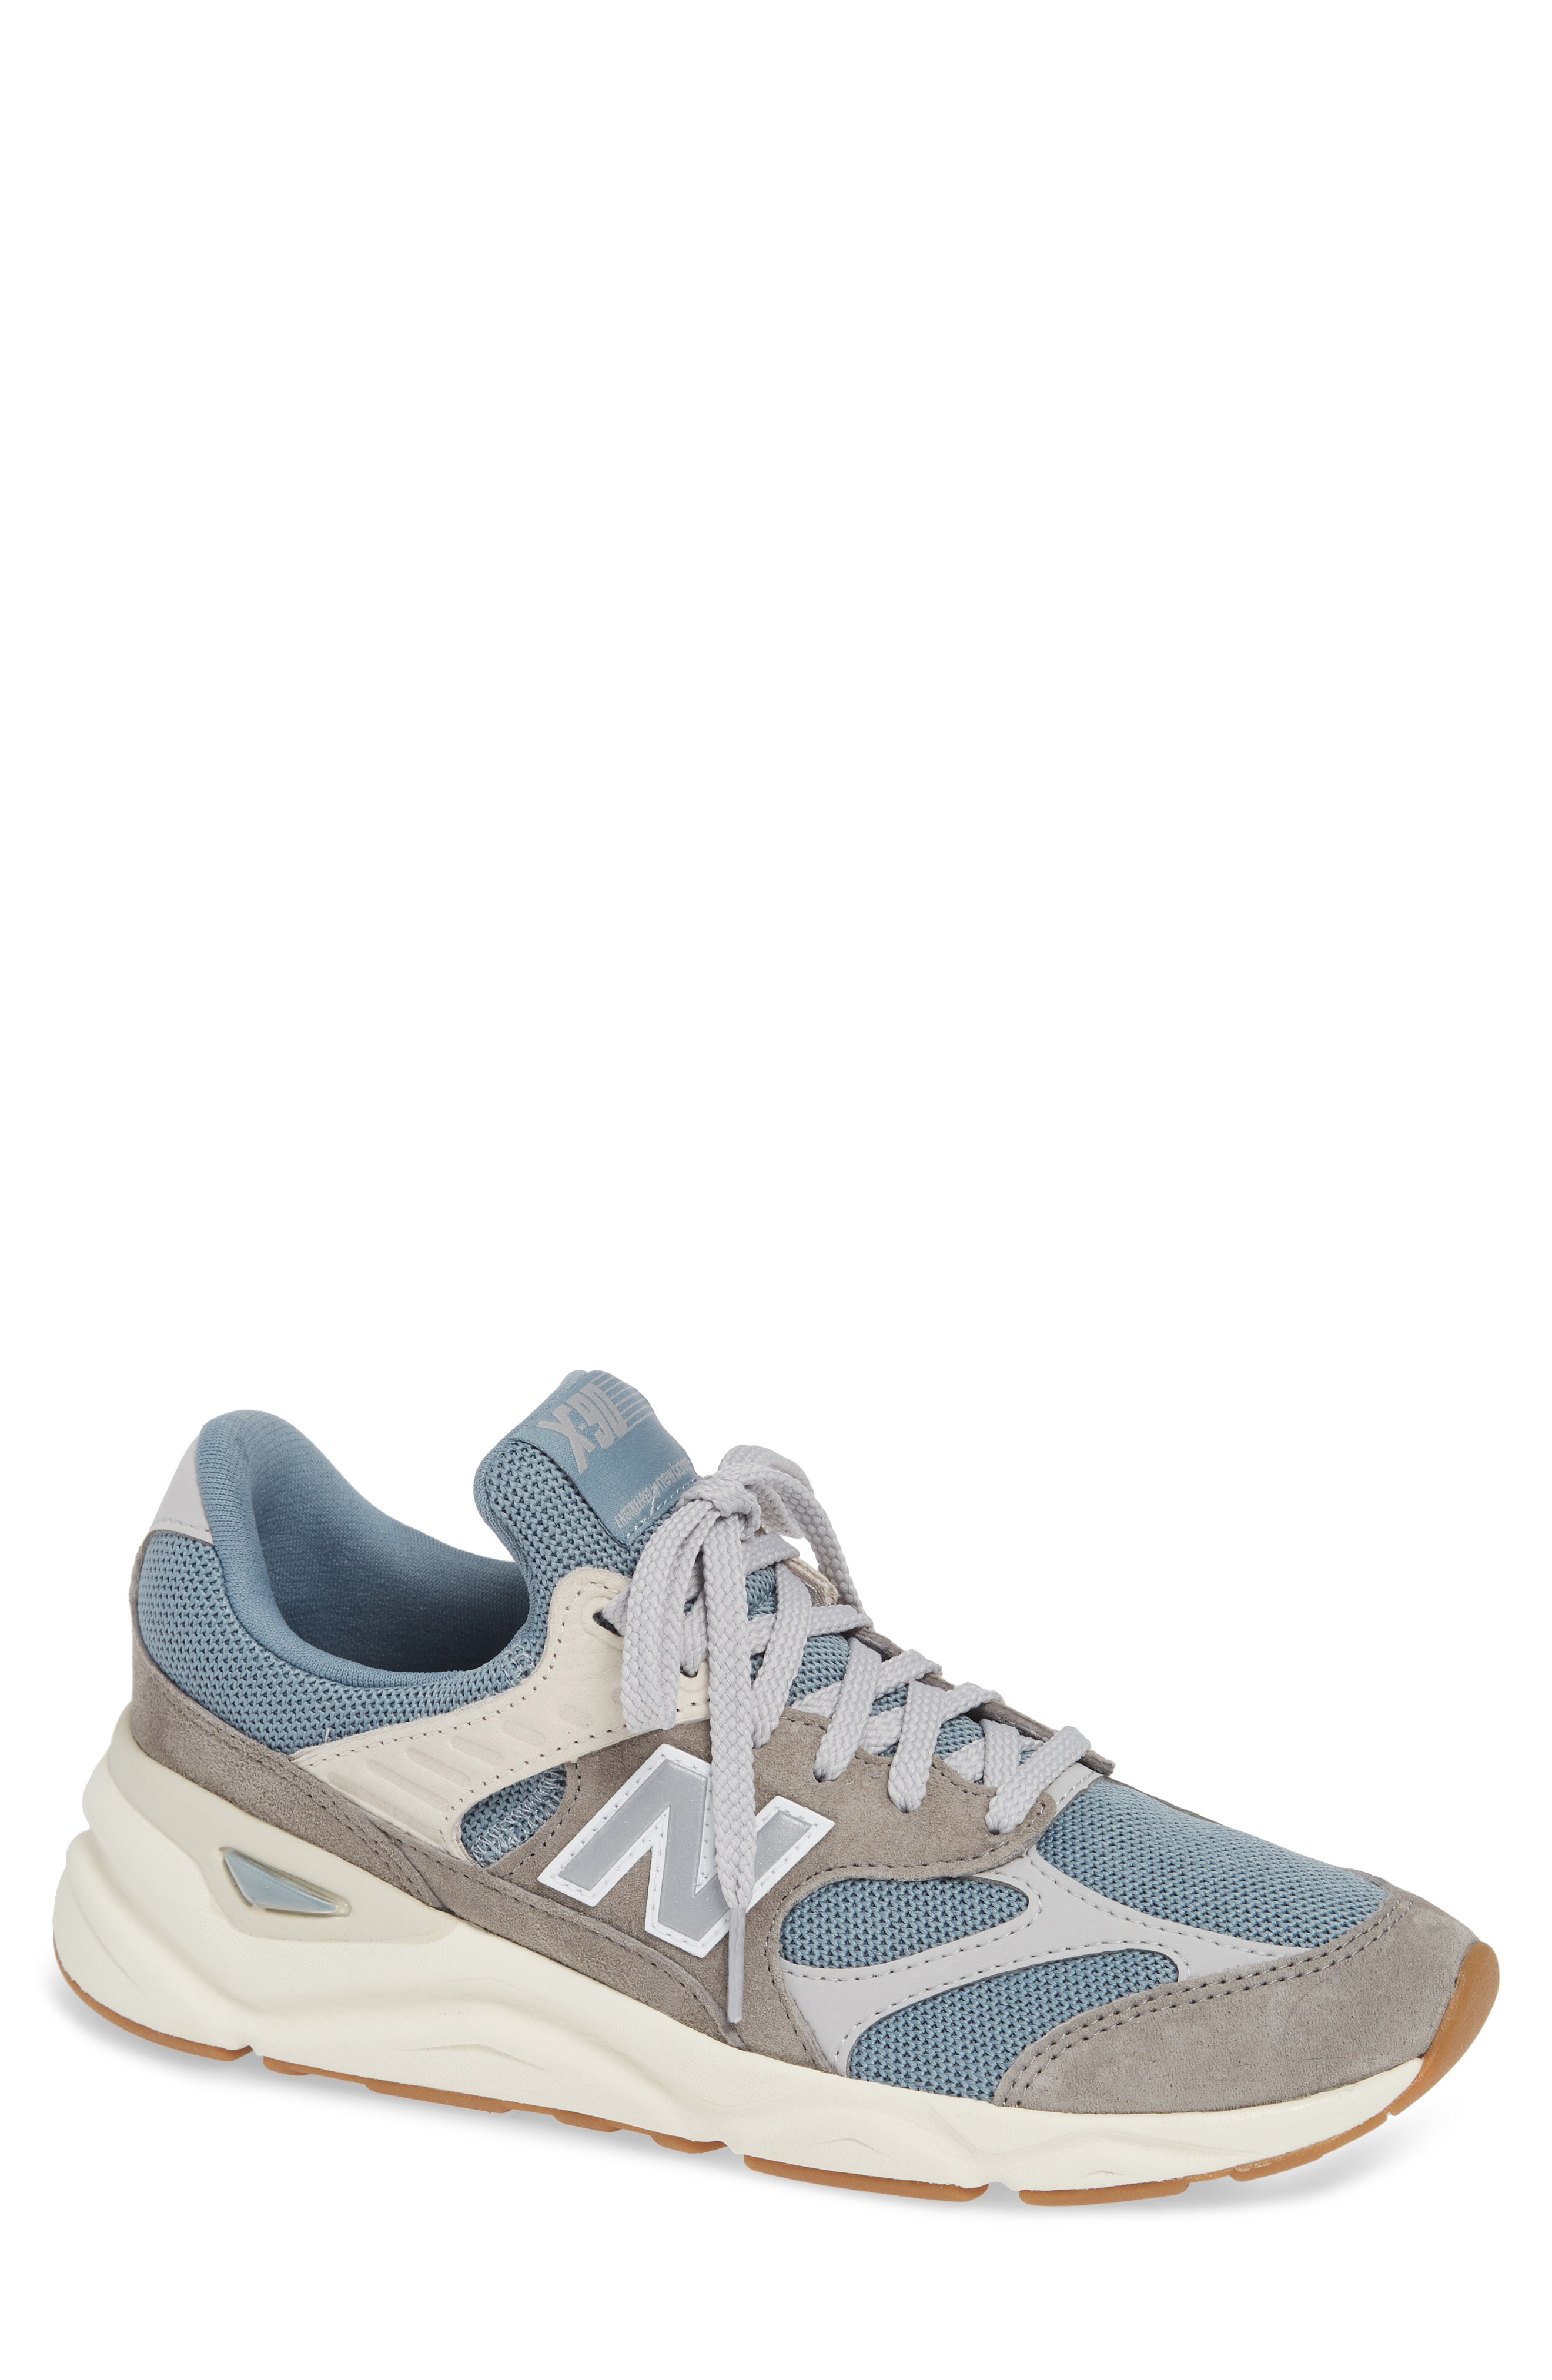 x90 textile by new balance